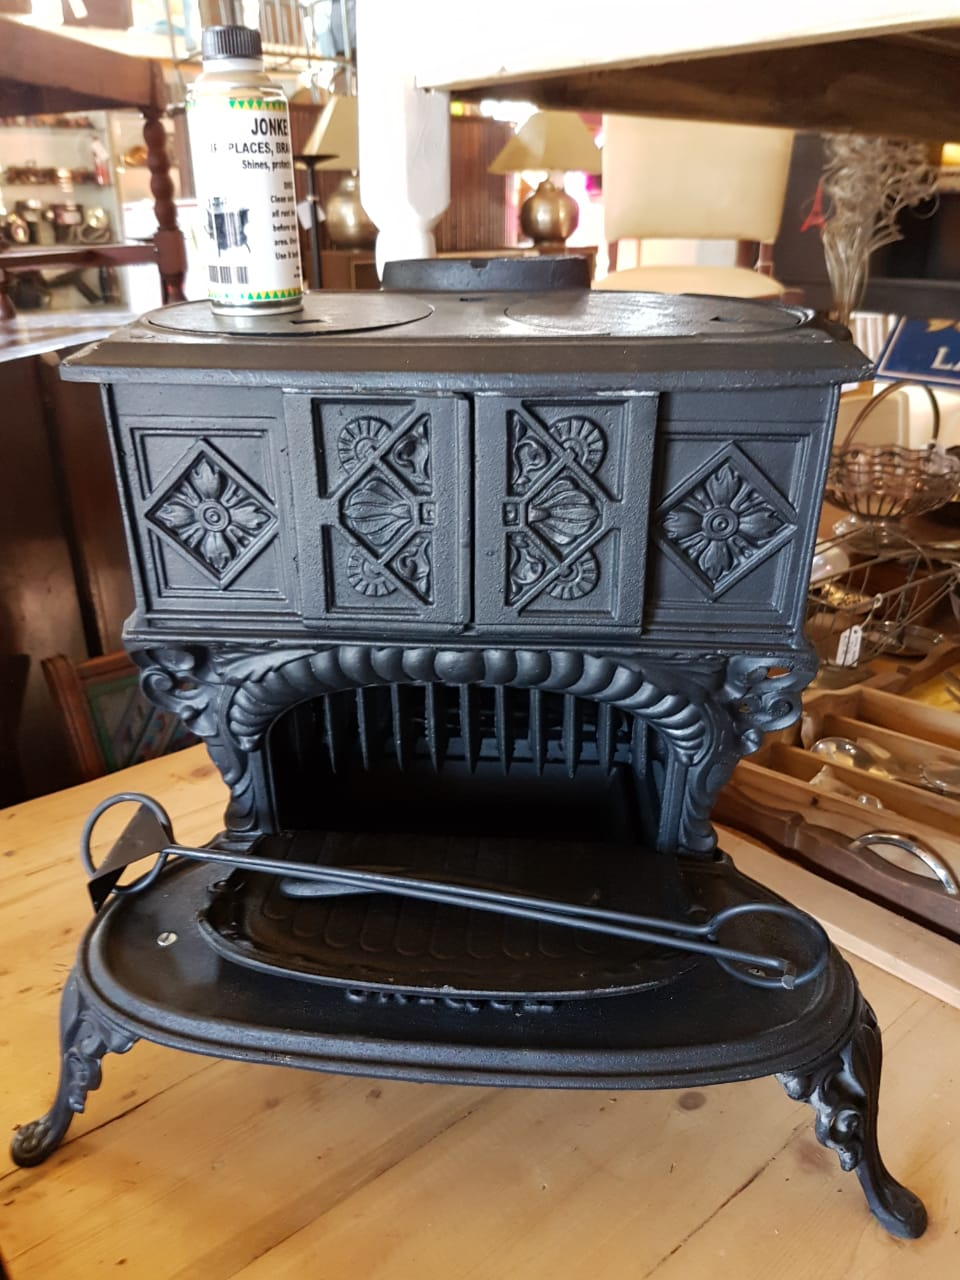 NEW Unique Coal/Wood Stove is attractive, heats up the room and you have the comfort of a two plate cooking facility  STOVE: Length 450 mm Width 330 mm Height 490 mm  CHIMNEY: Diameter 4 5/8 ”  FIREBOX: Length 450 mm Width 330 mm Height 490 mm  OPTIONAL: Cast Iron Base Plate & Top Cover  NB: Price excludes pipes, elbows & cowl  WEIGHT: +- 42 kg PRICE: R4299